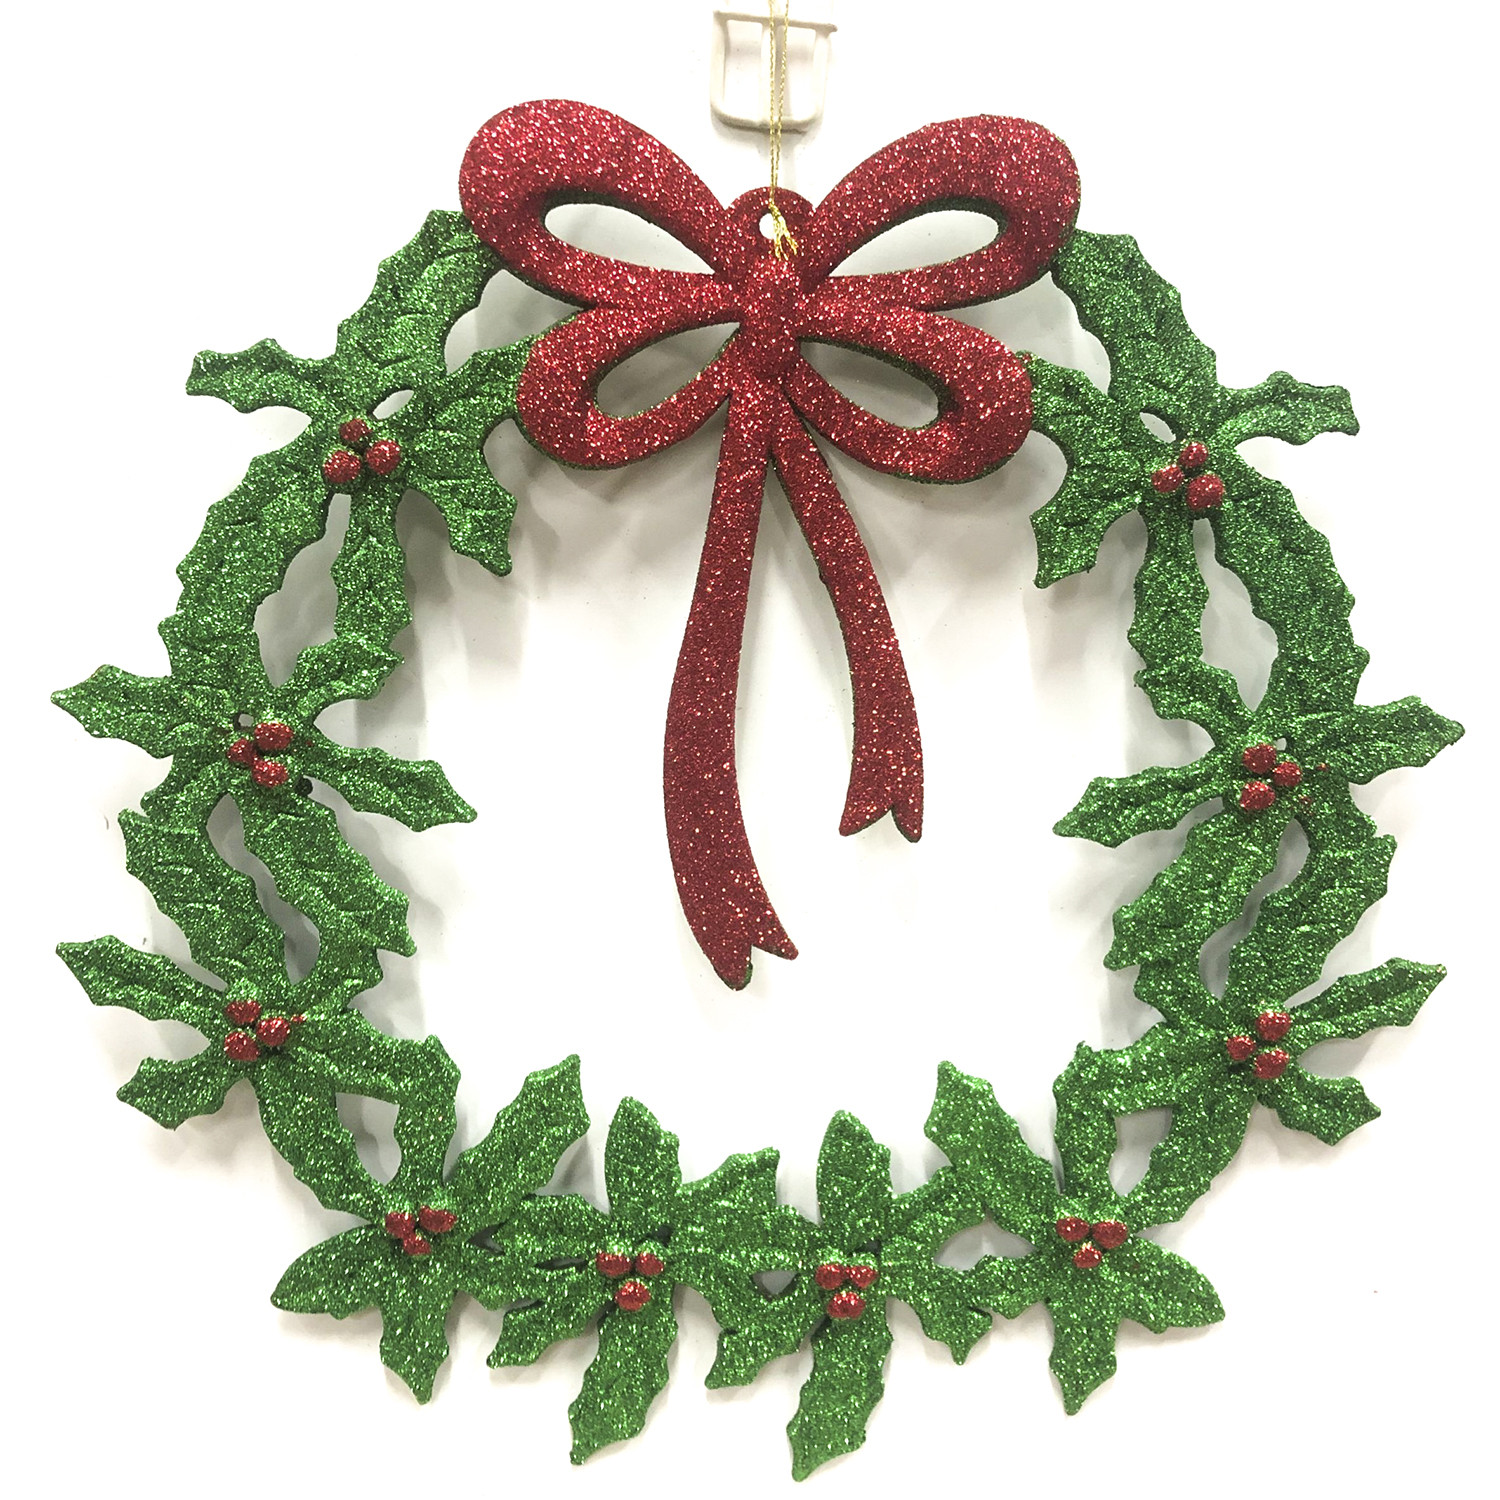 Hanging Holly Wreath Image